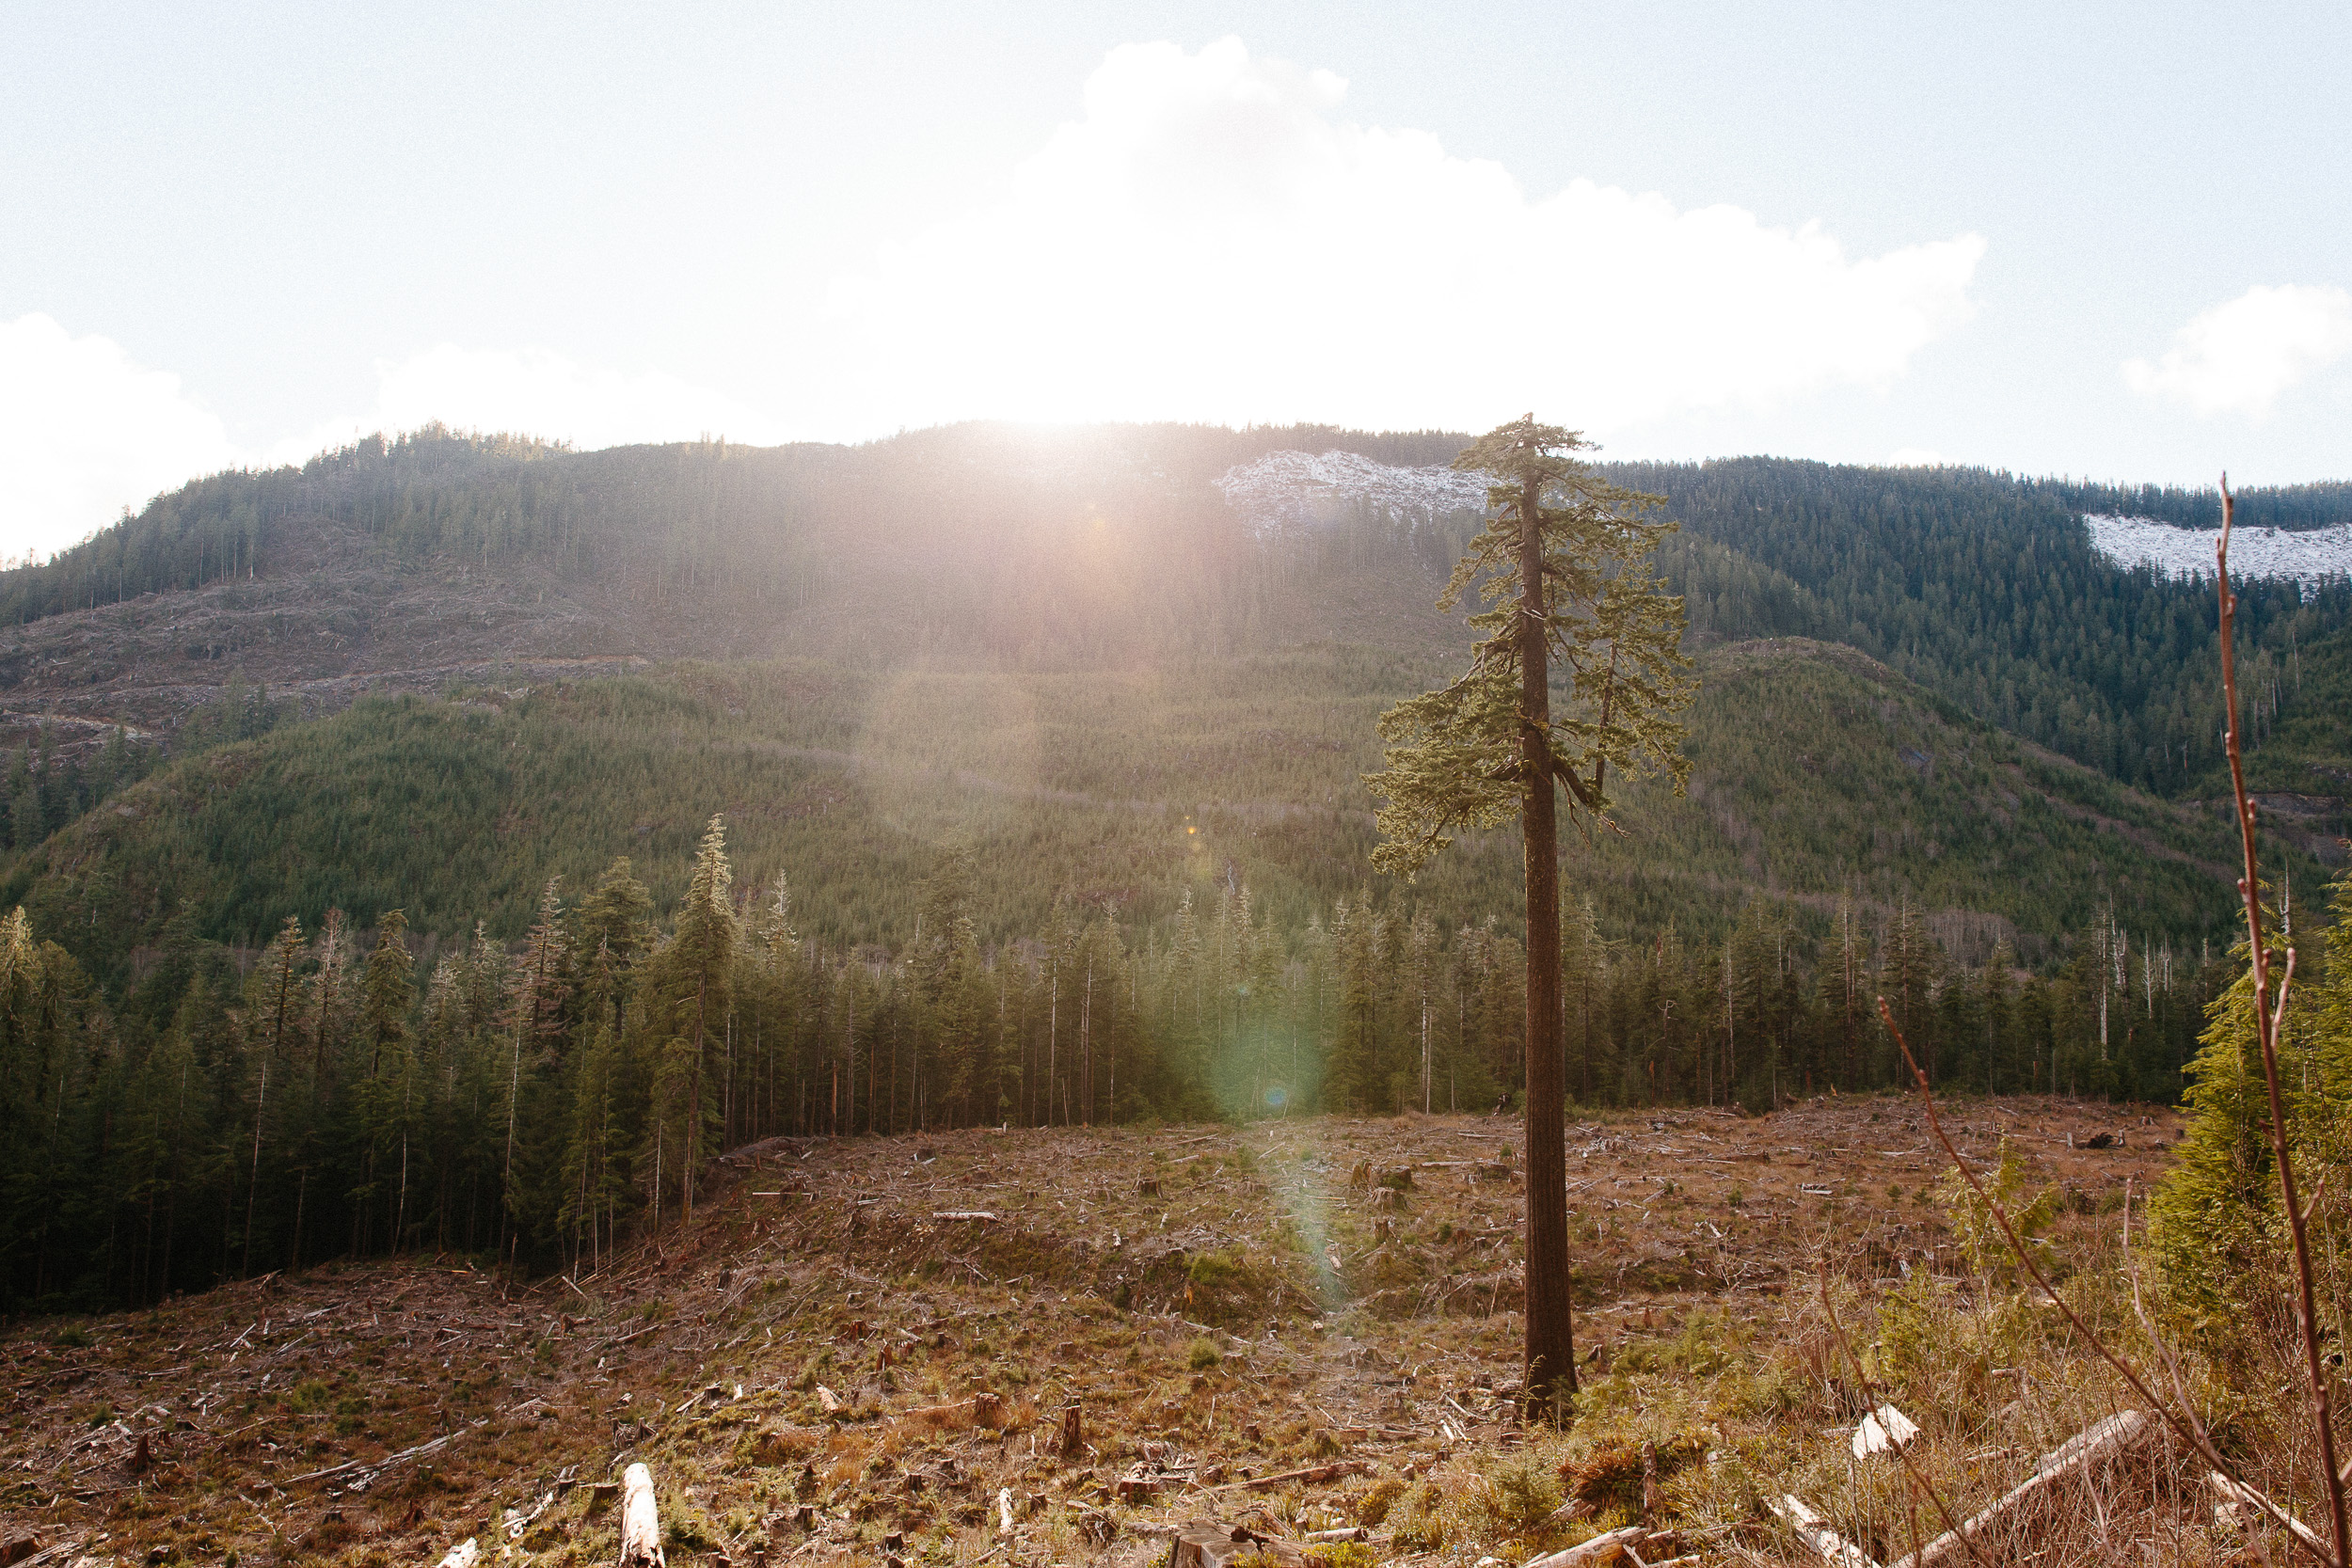 02-Vancouver-Island-Old-Growth-Forests-Logging-Port-Renfrew-Big-Lonely-Doug-Clearcut.jpg